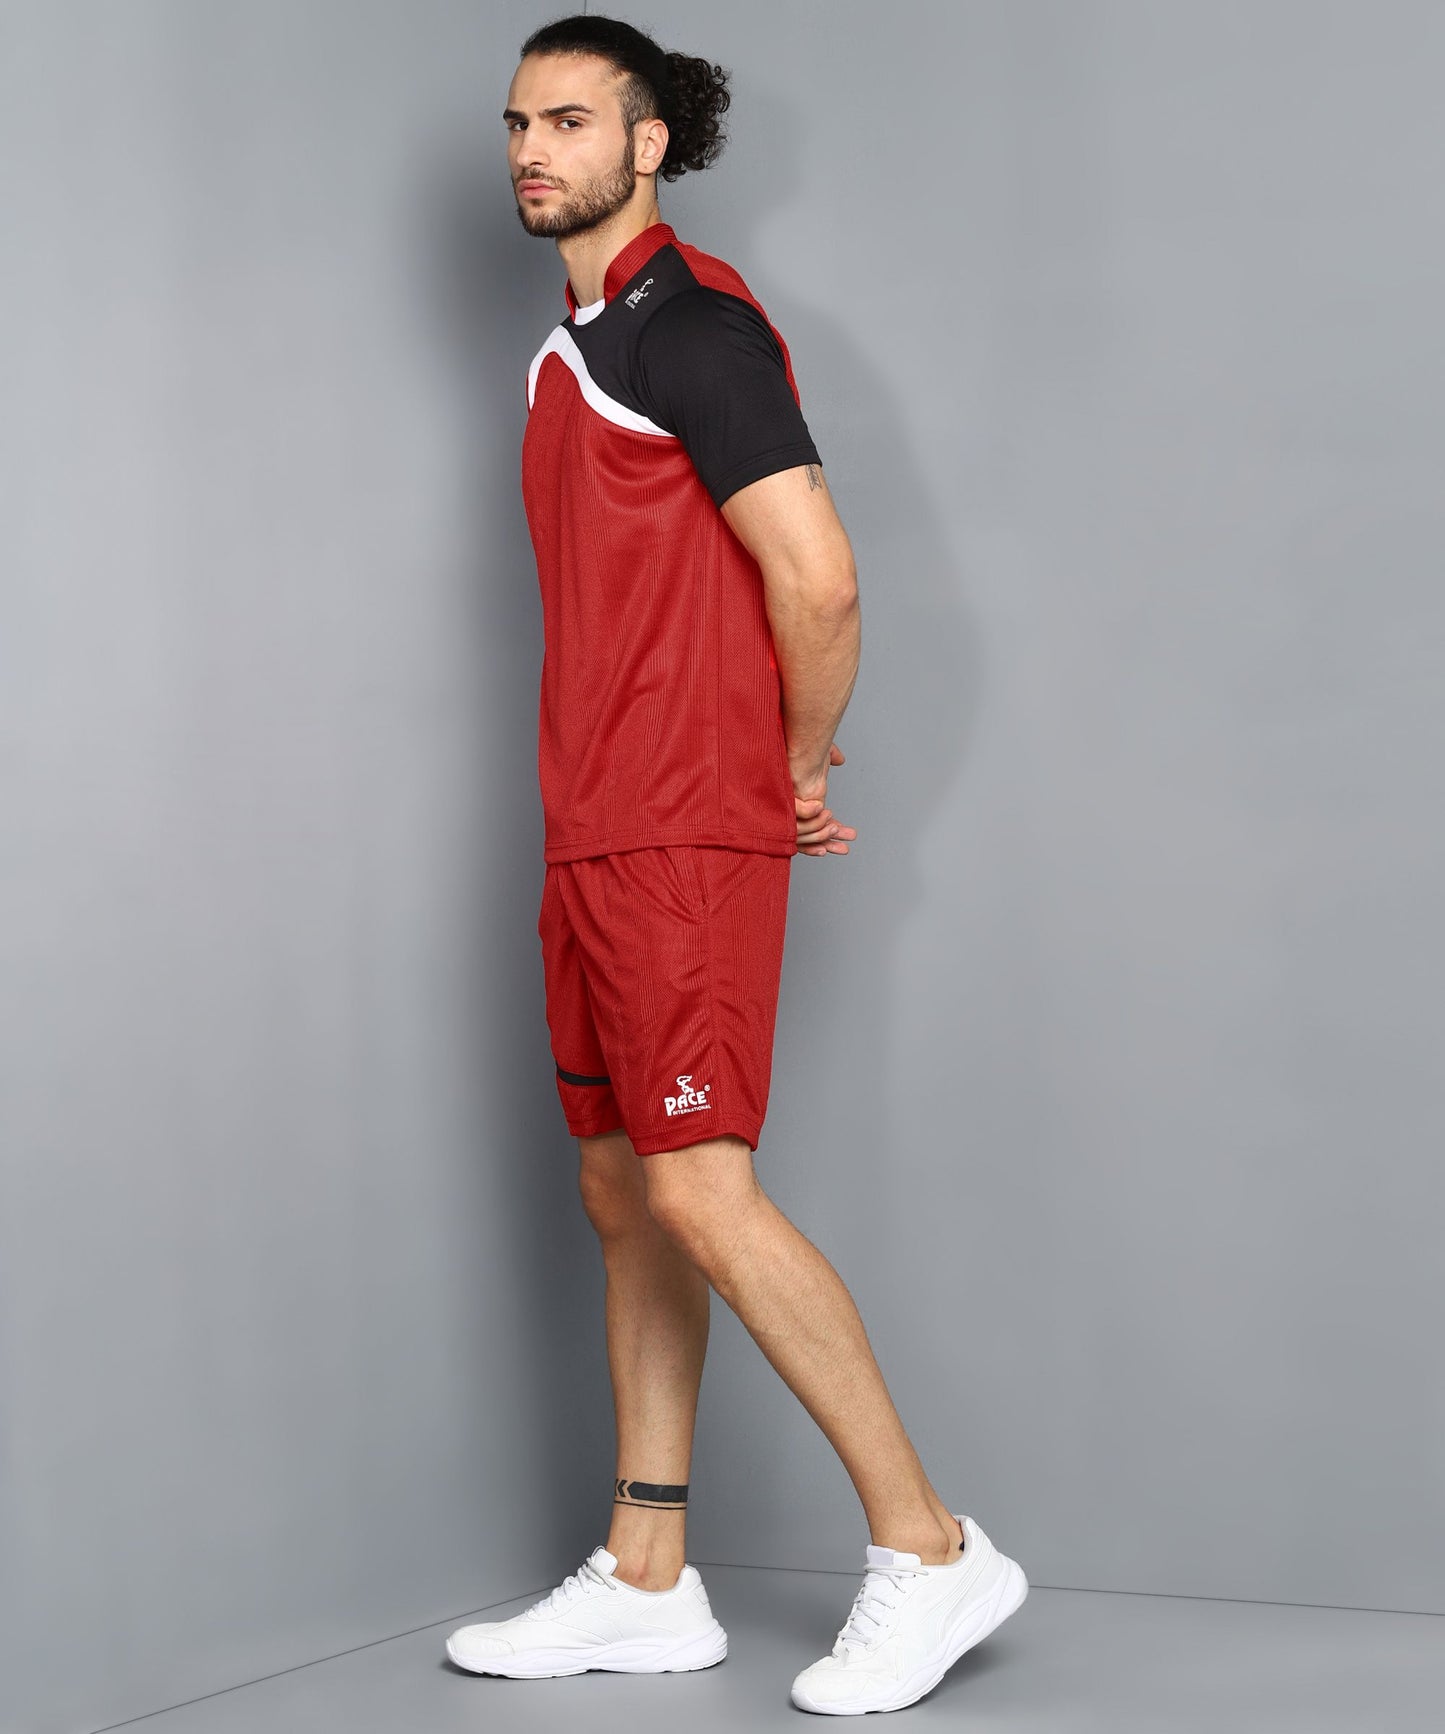 Pace International Men Football Jersey and Short (Red/ Black)